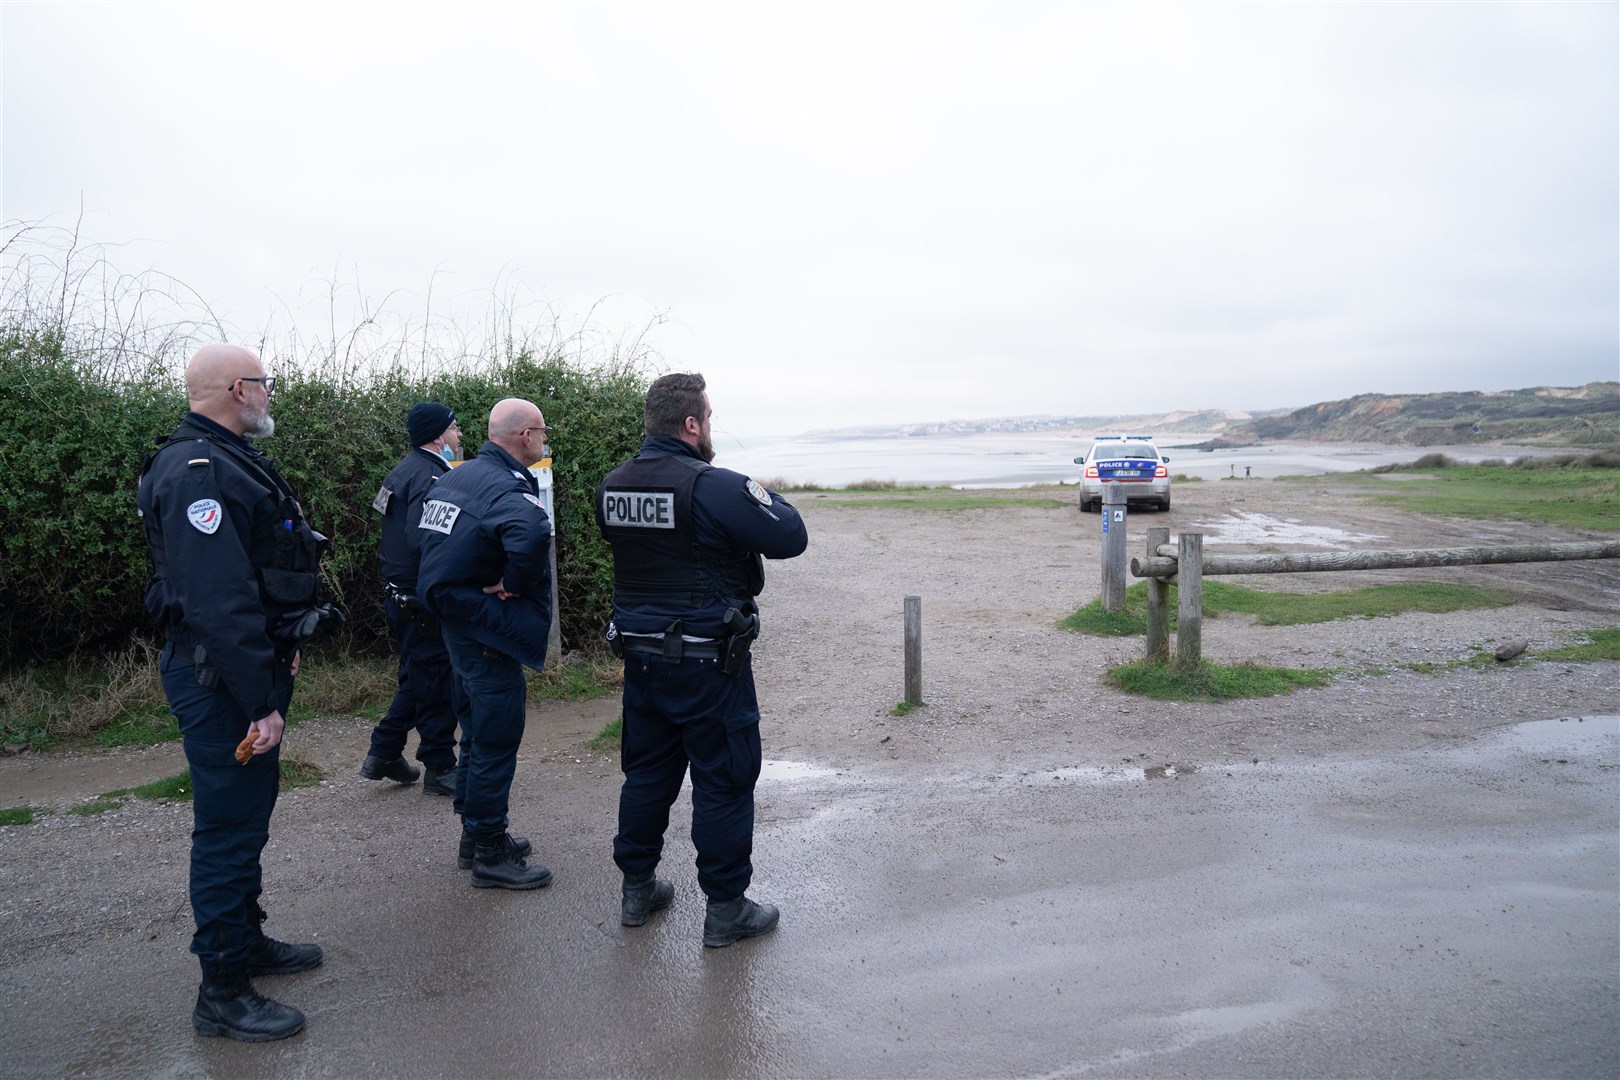 French police at a beach near Wimereux, believed to be used by people trying to get to the UK (Stefan Rousseau/PA)